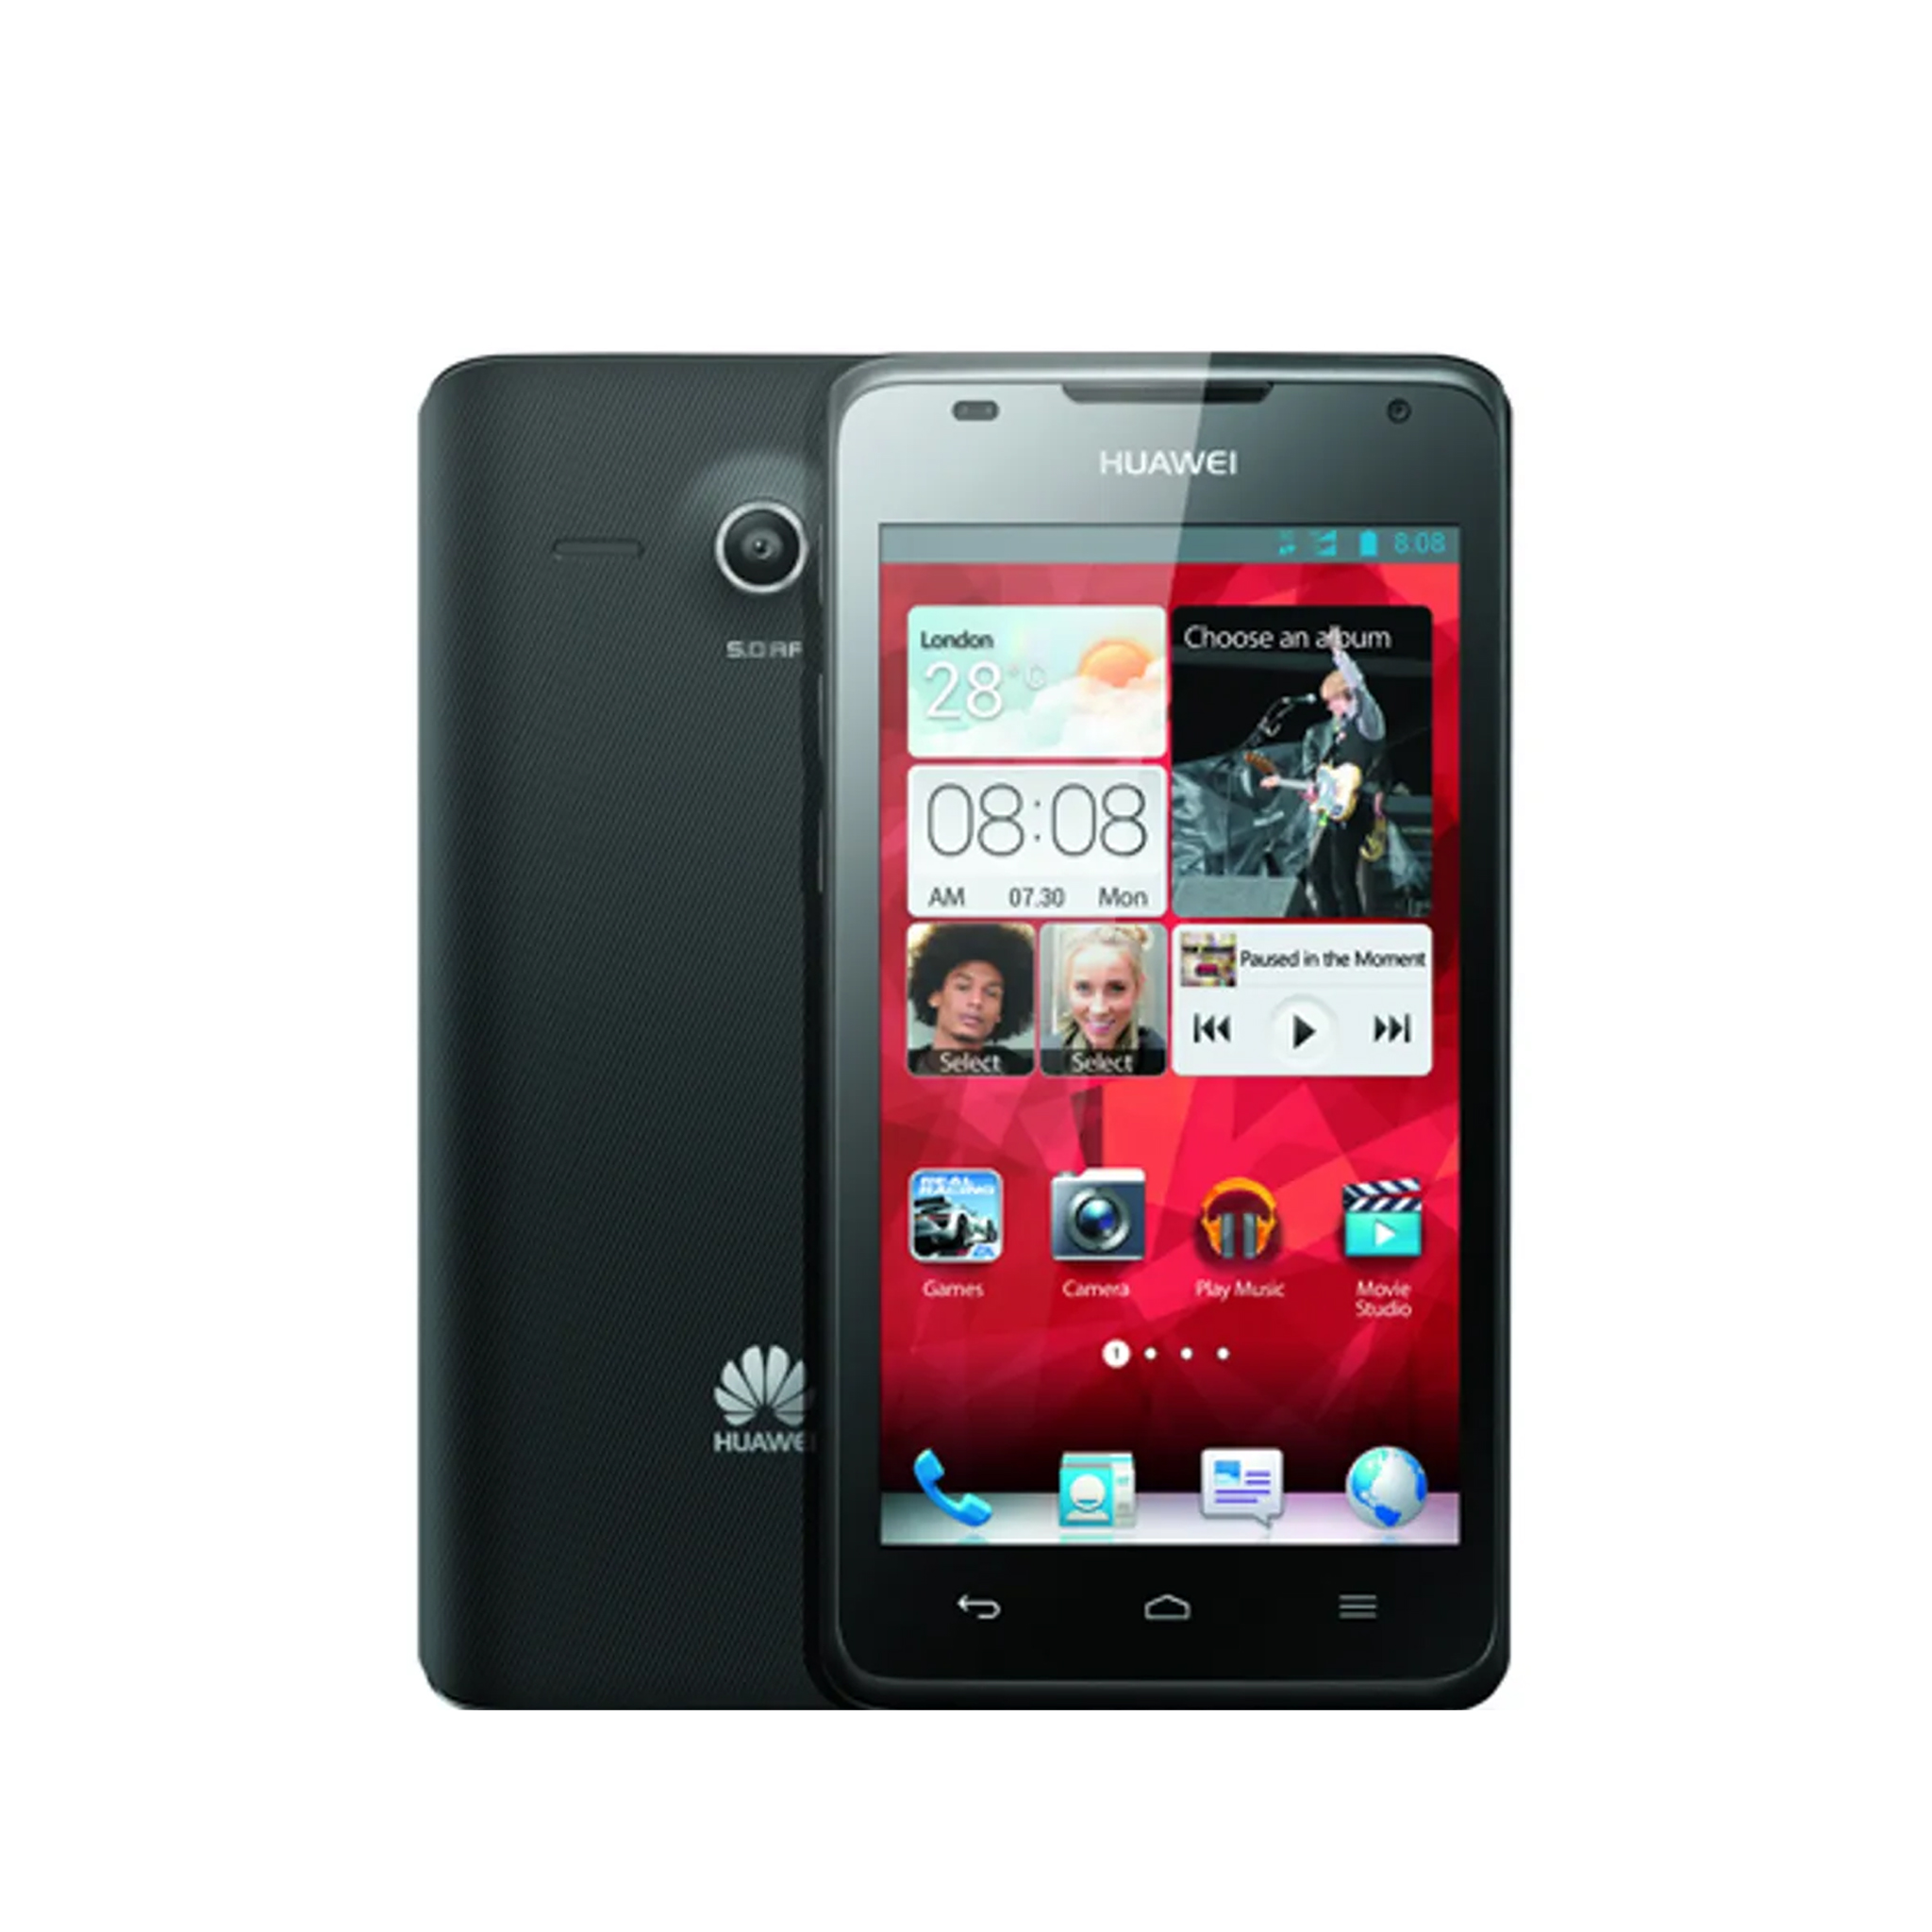 Huawei Ascend Y210 repair service shop malaysia